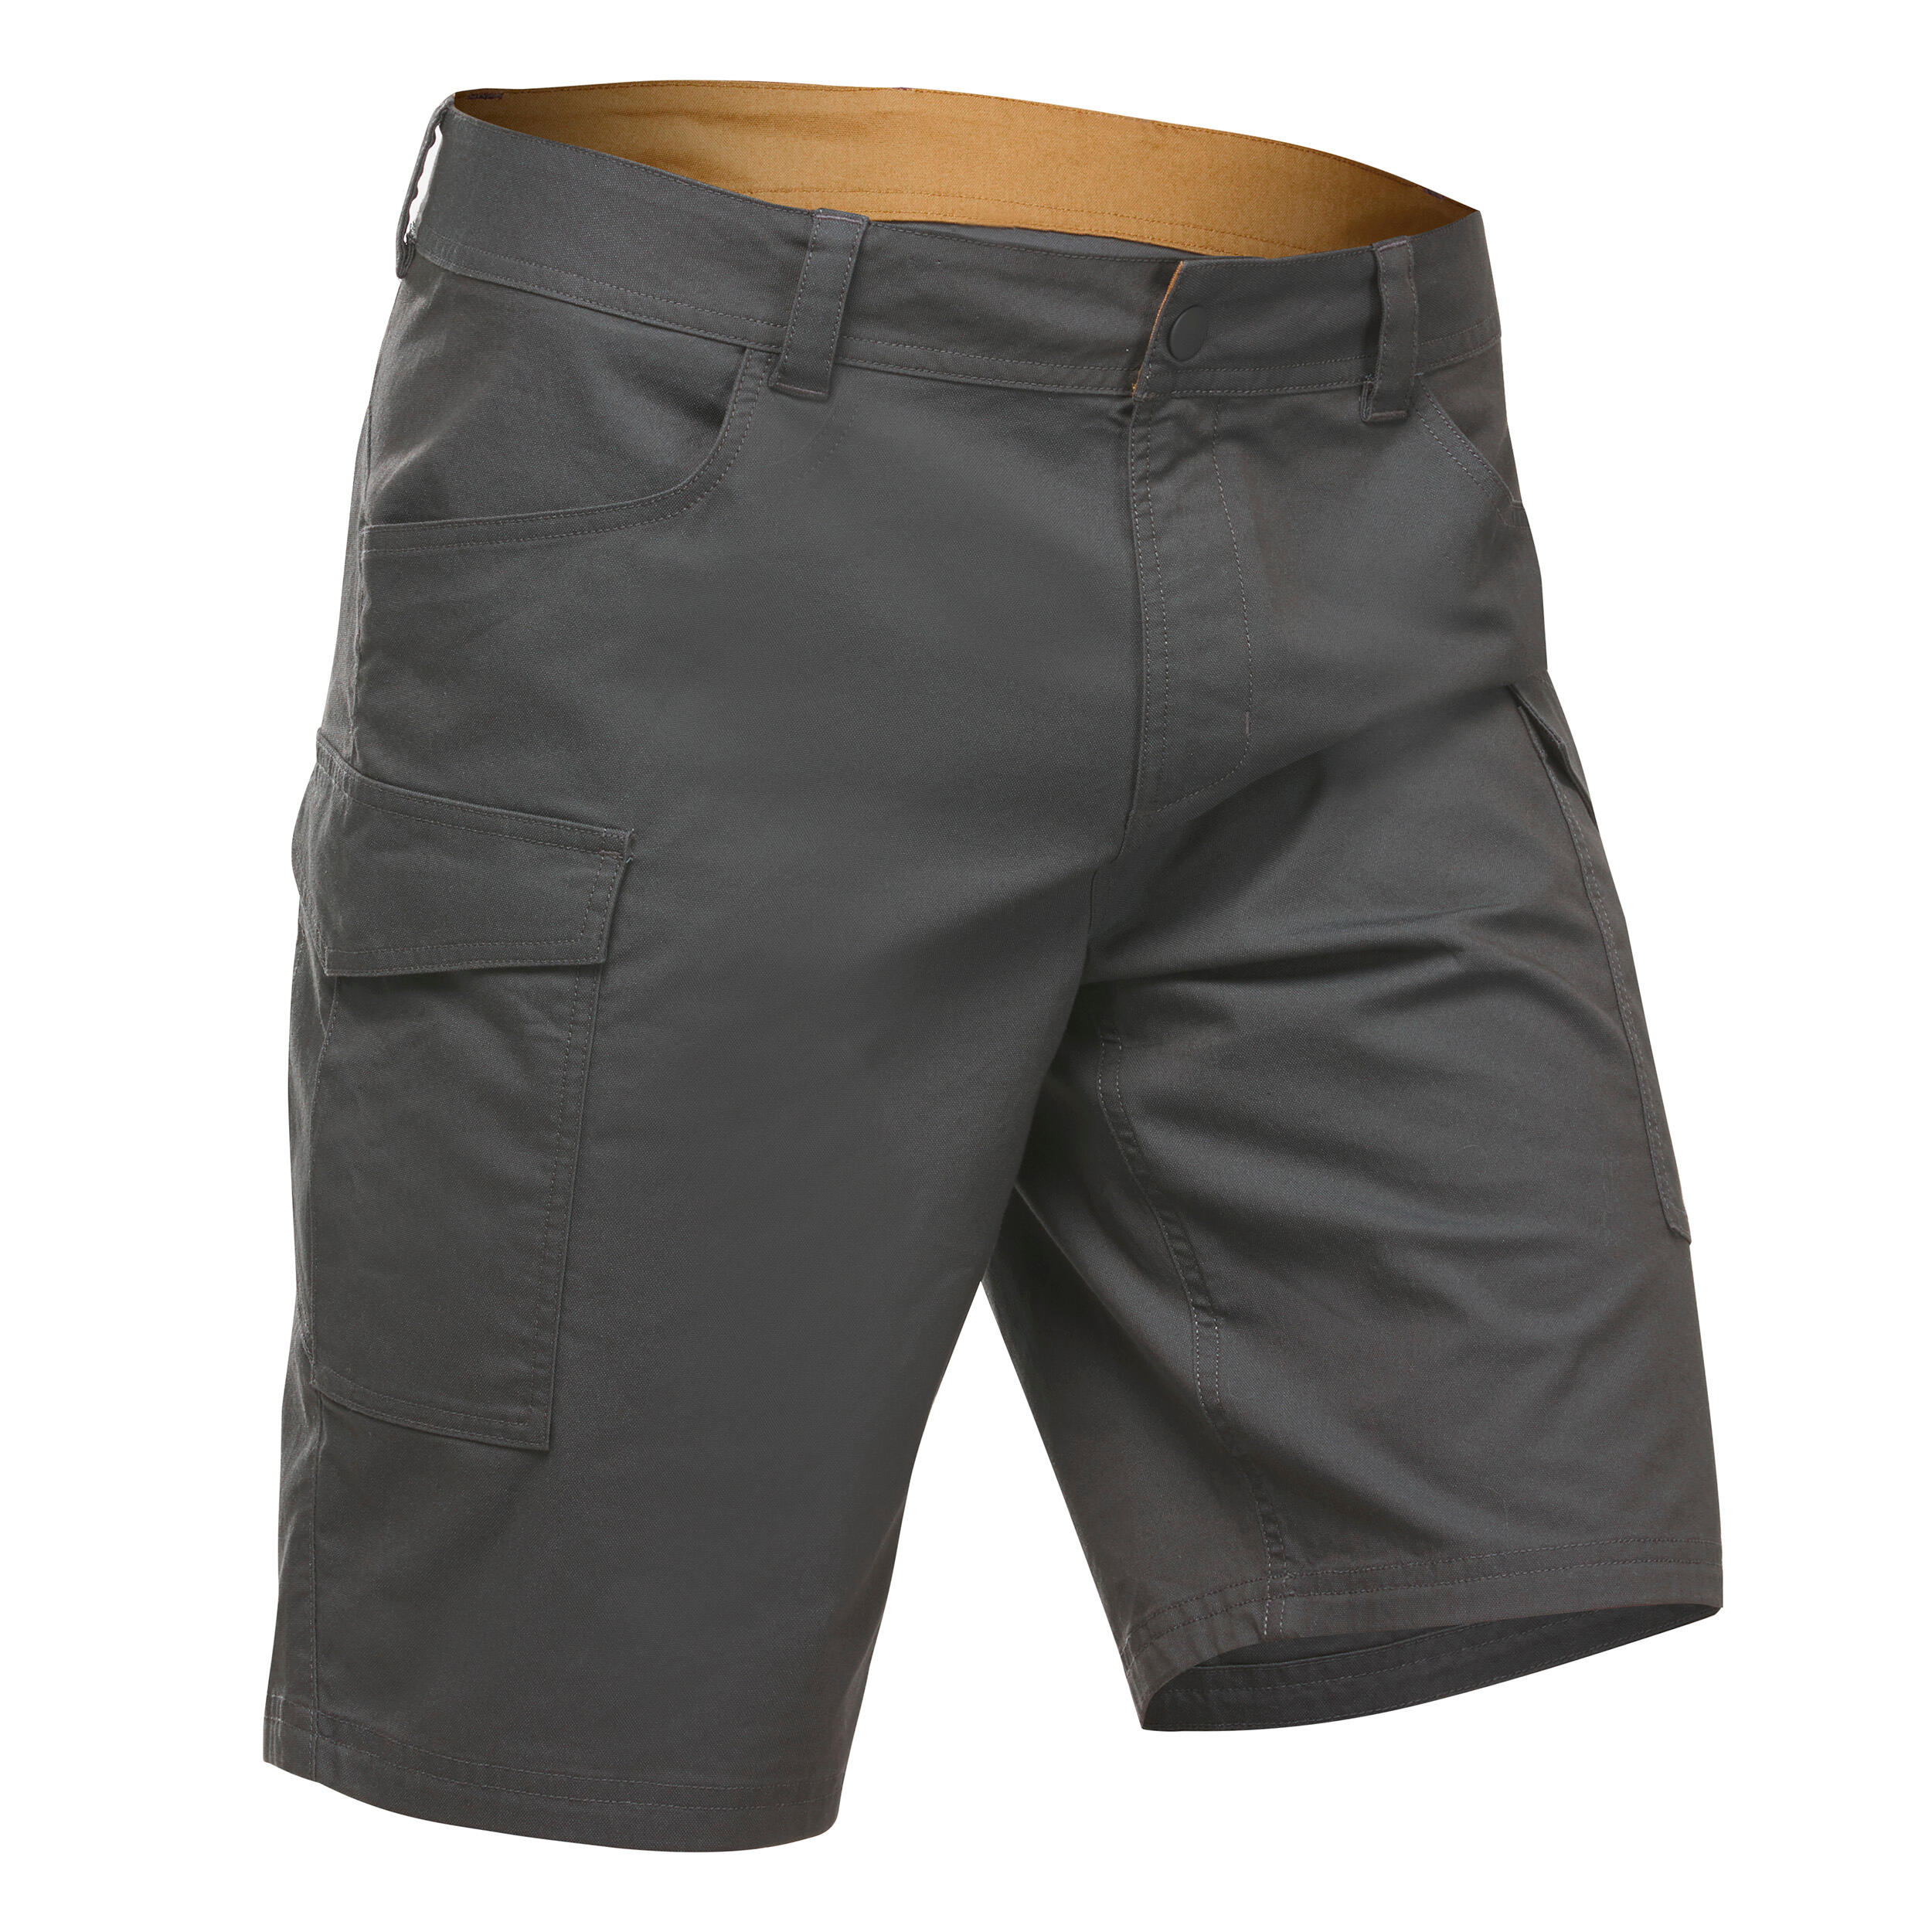 Walking Trousers and Shorts  Outdoor Legwear  Alpkit